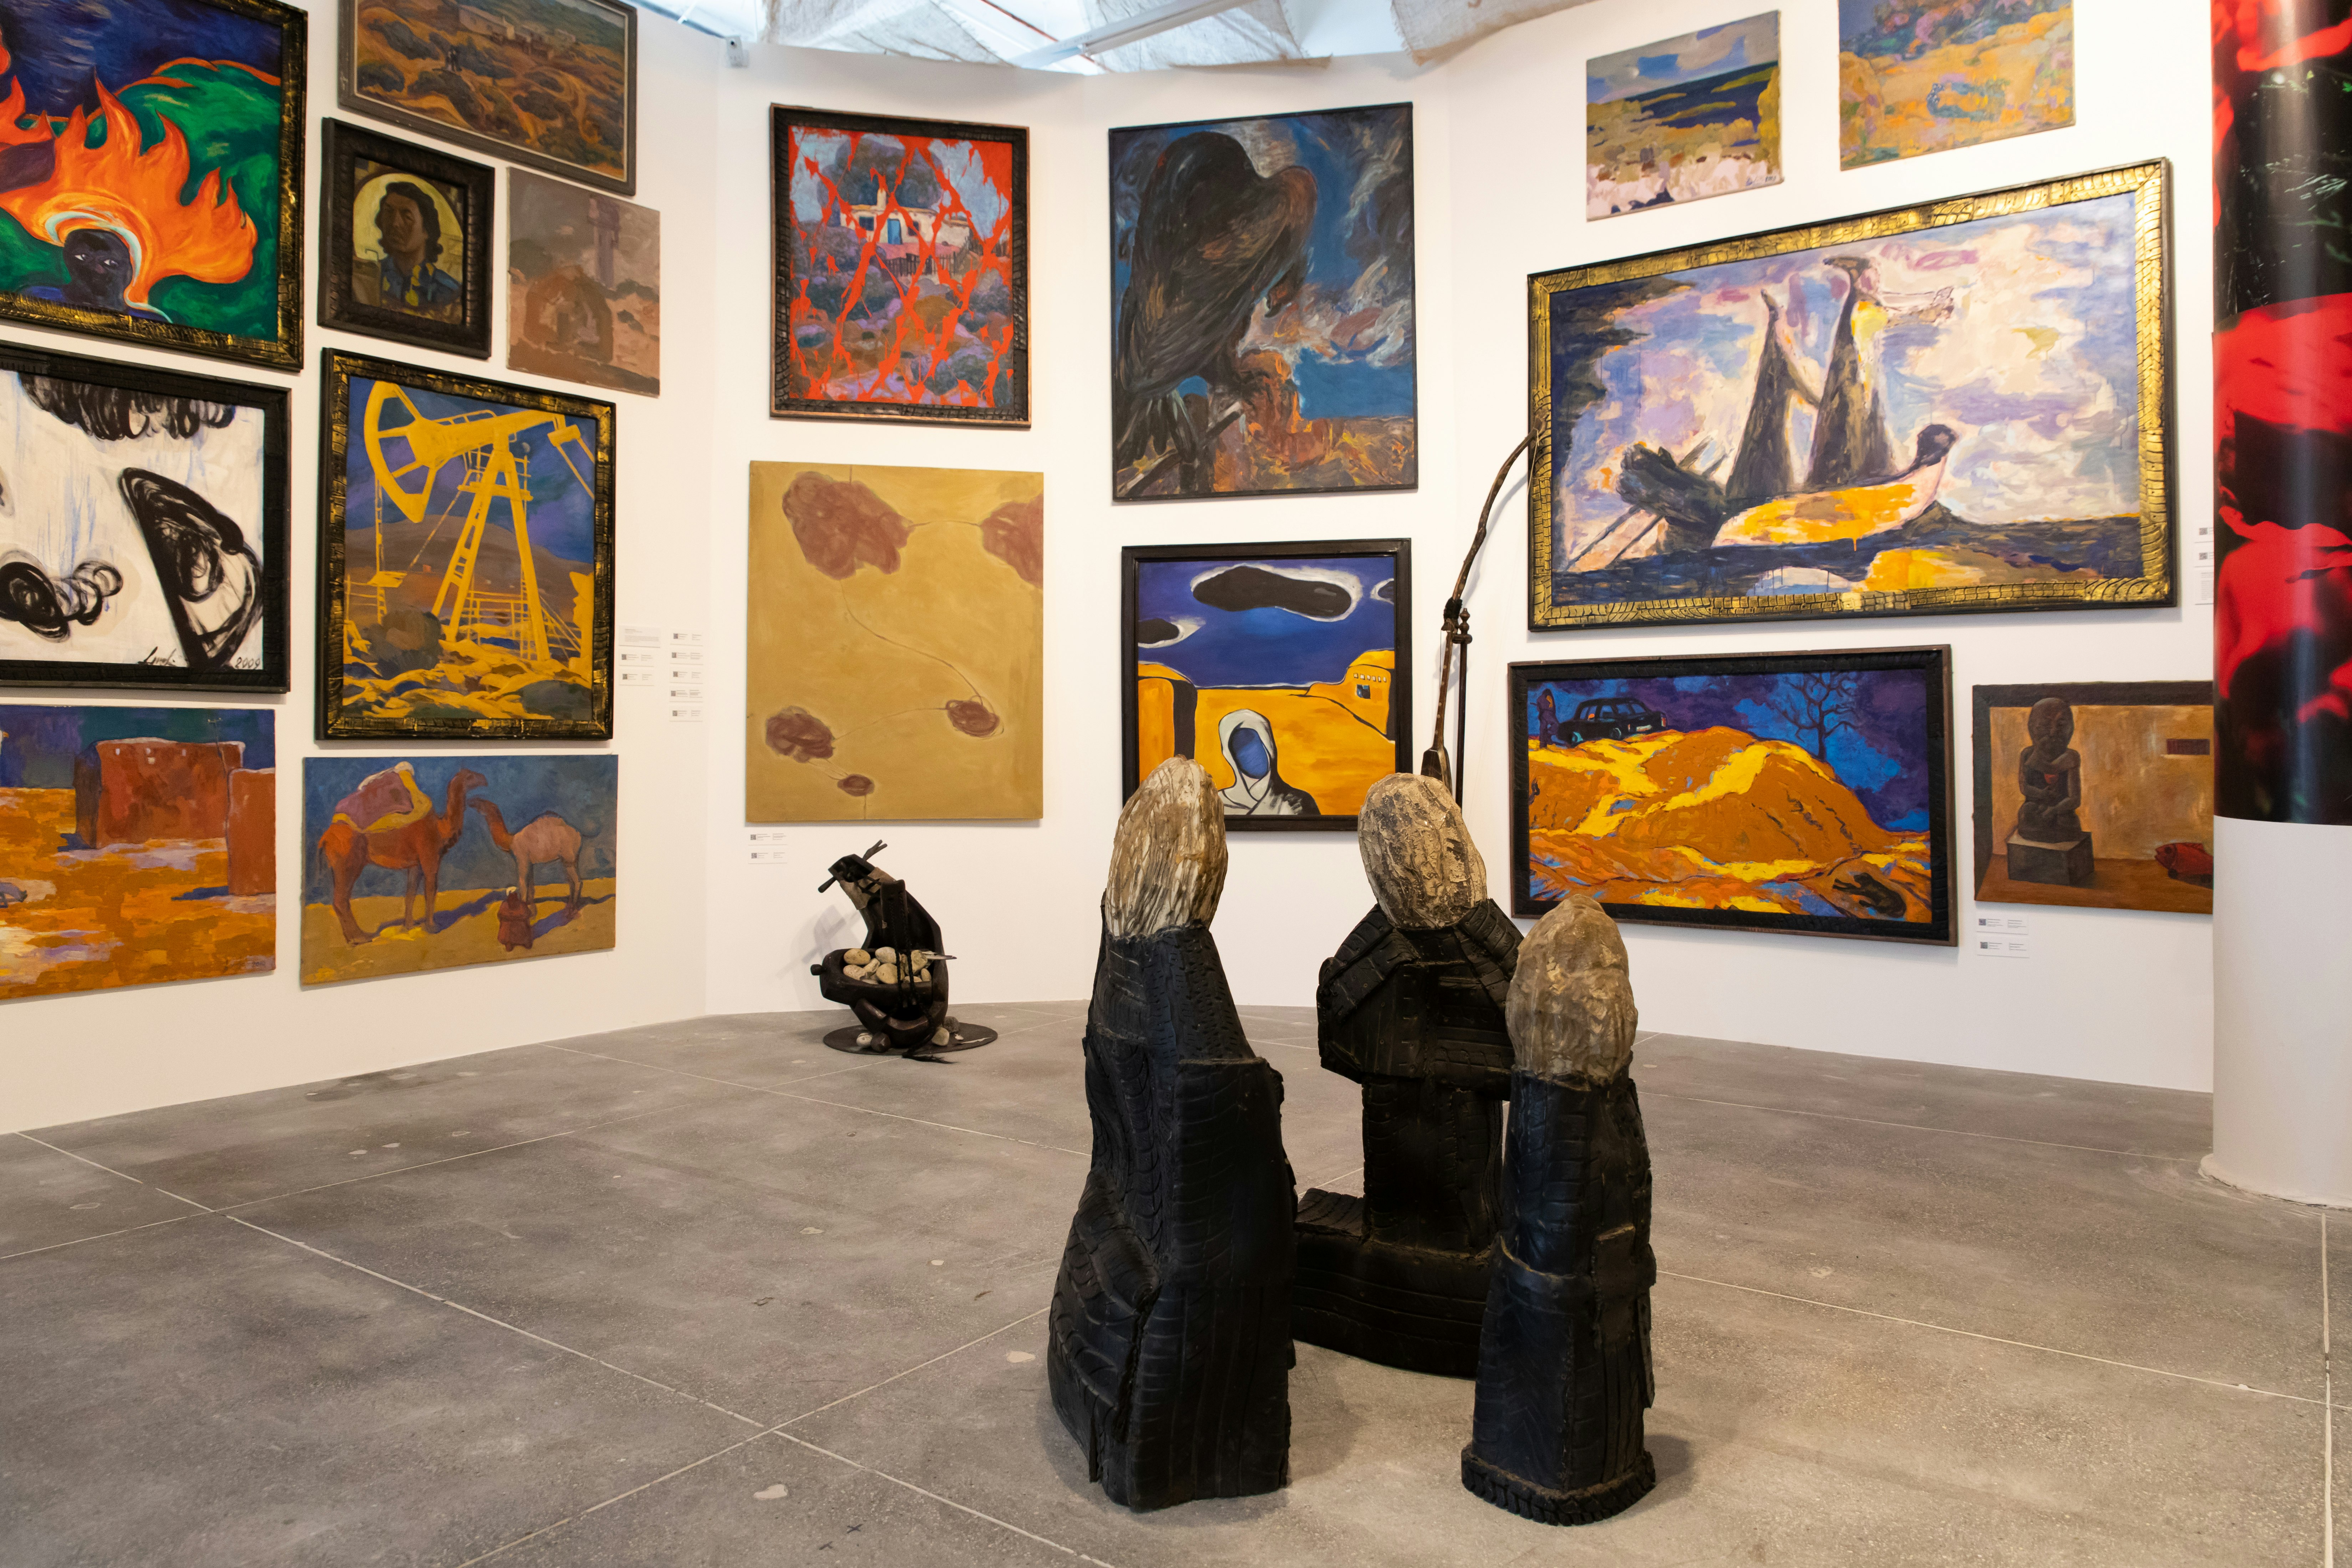 A sculpture resembling three figures facing eachother is in the foreground. In the background is a collection of artworks hung across three walls.